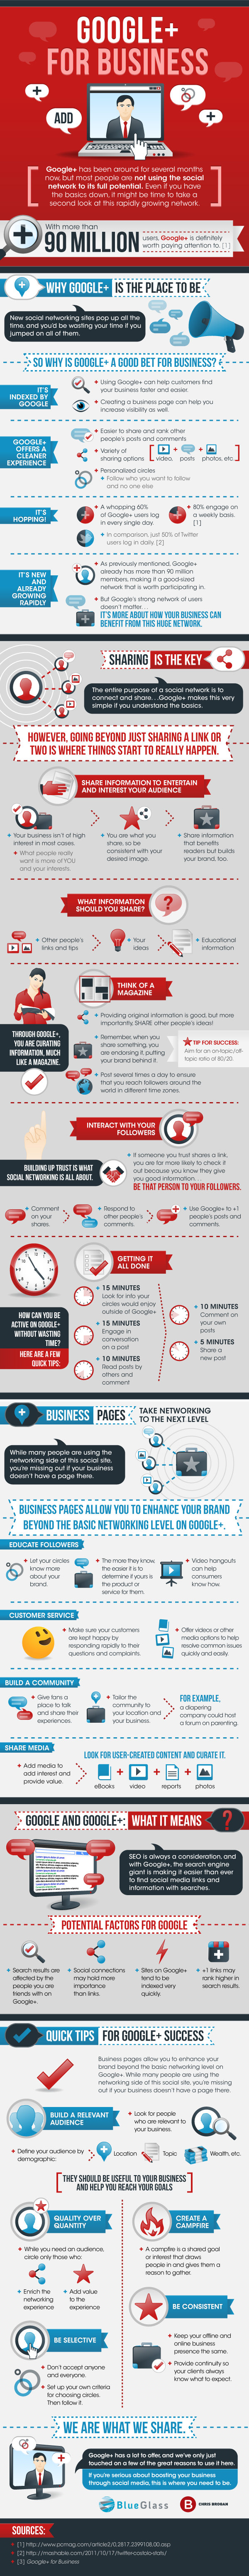 Why Google+ is Important For Business (Infographic)